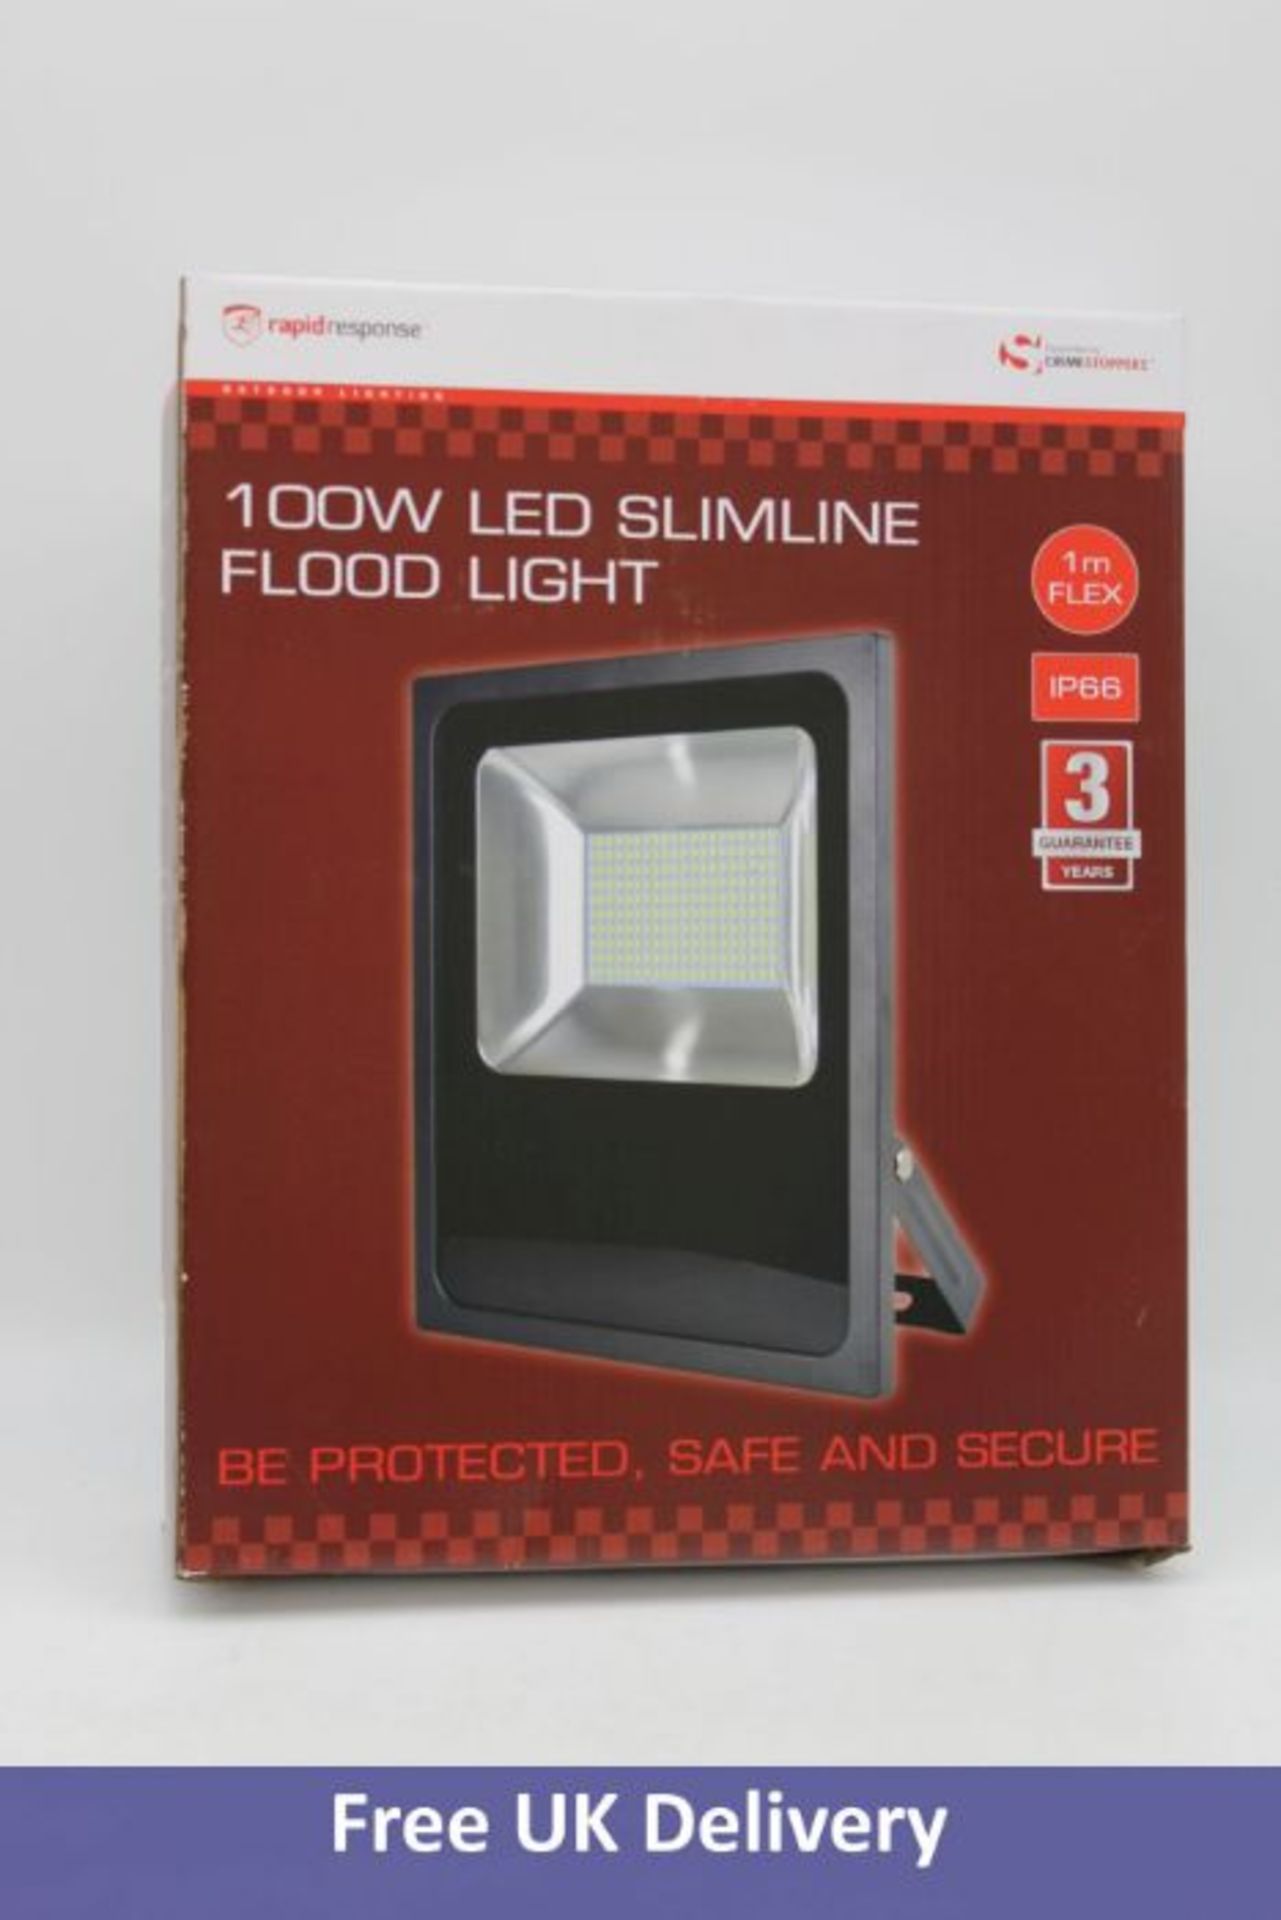 Three Rapid Response 100w Slimline LED Floodlight with 1m Cable, Energy Rating A+, Black - Image 3 of 3